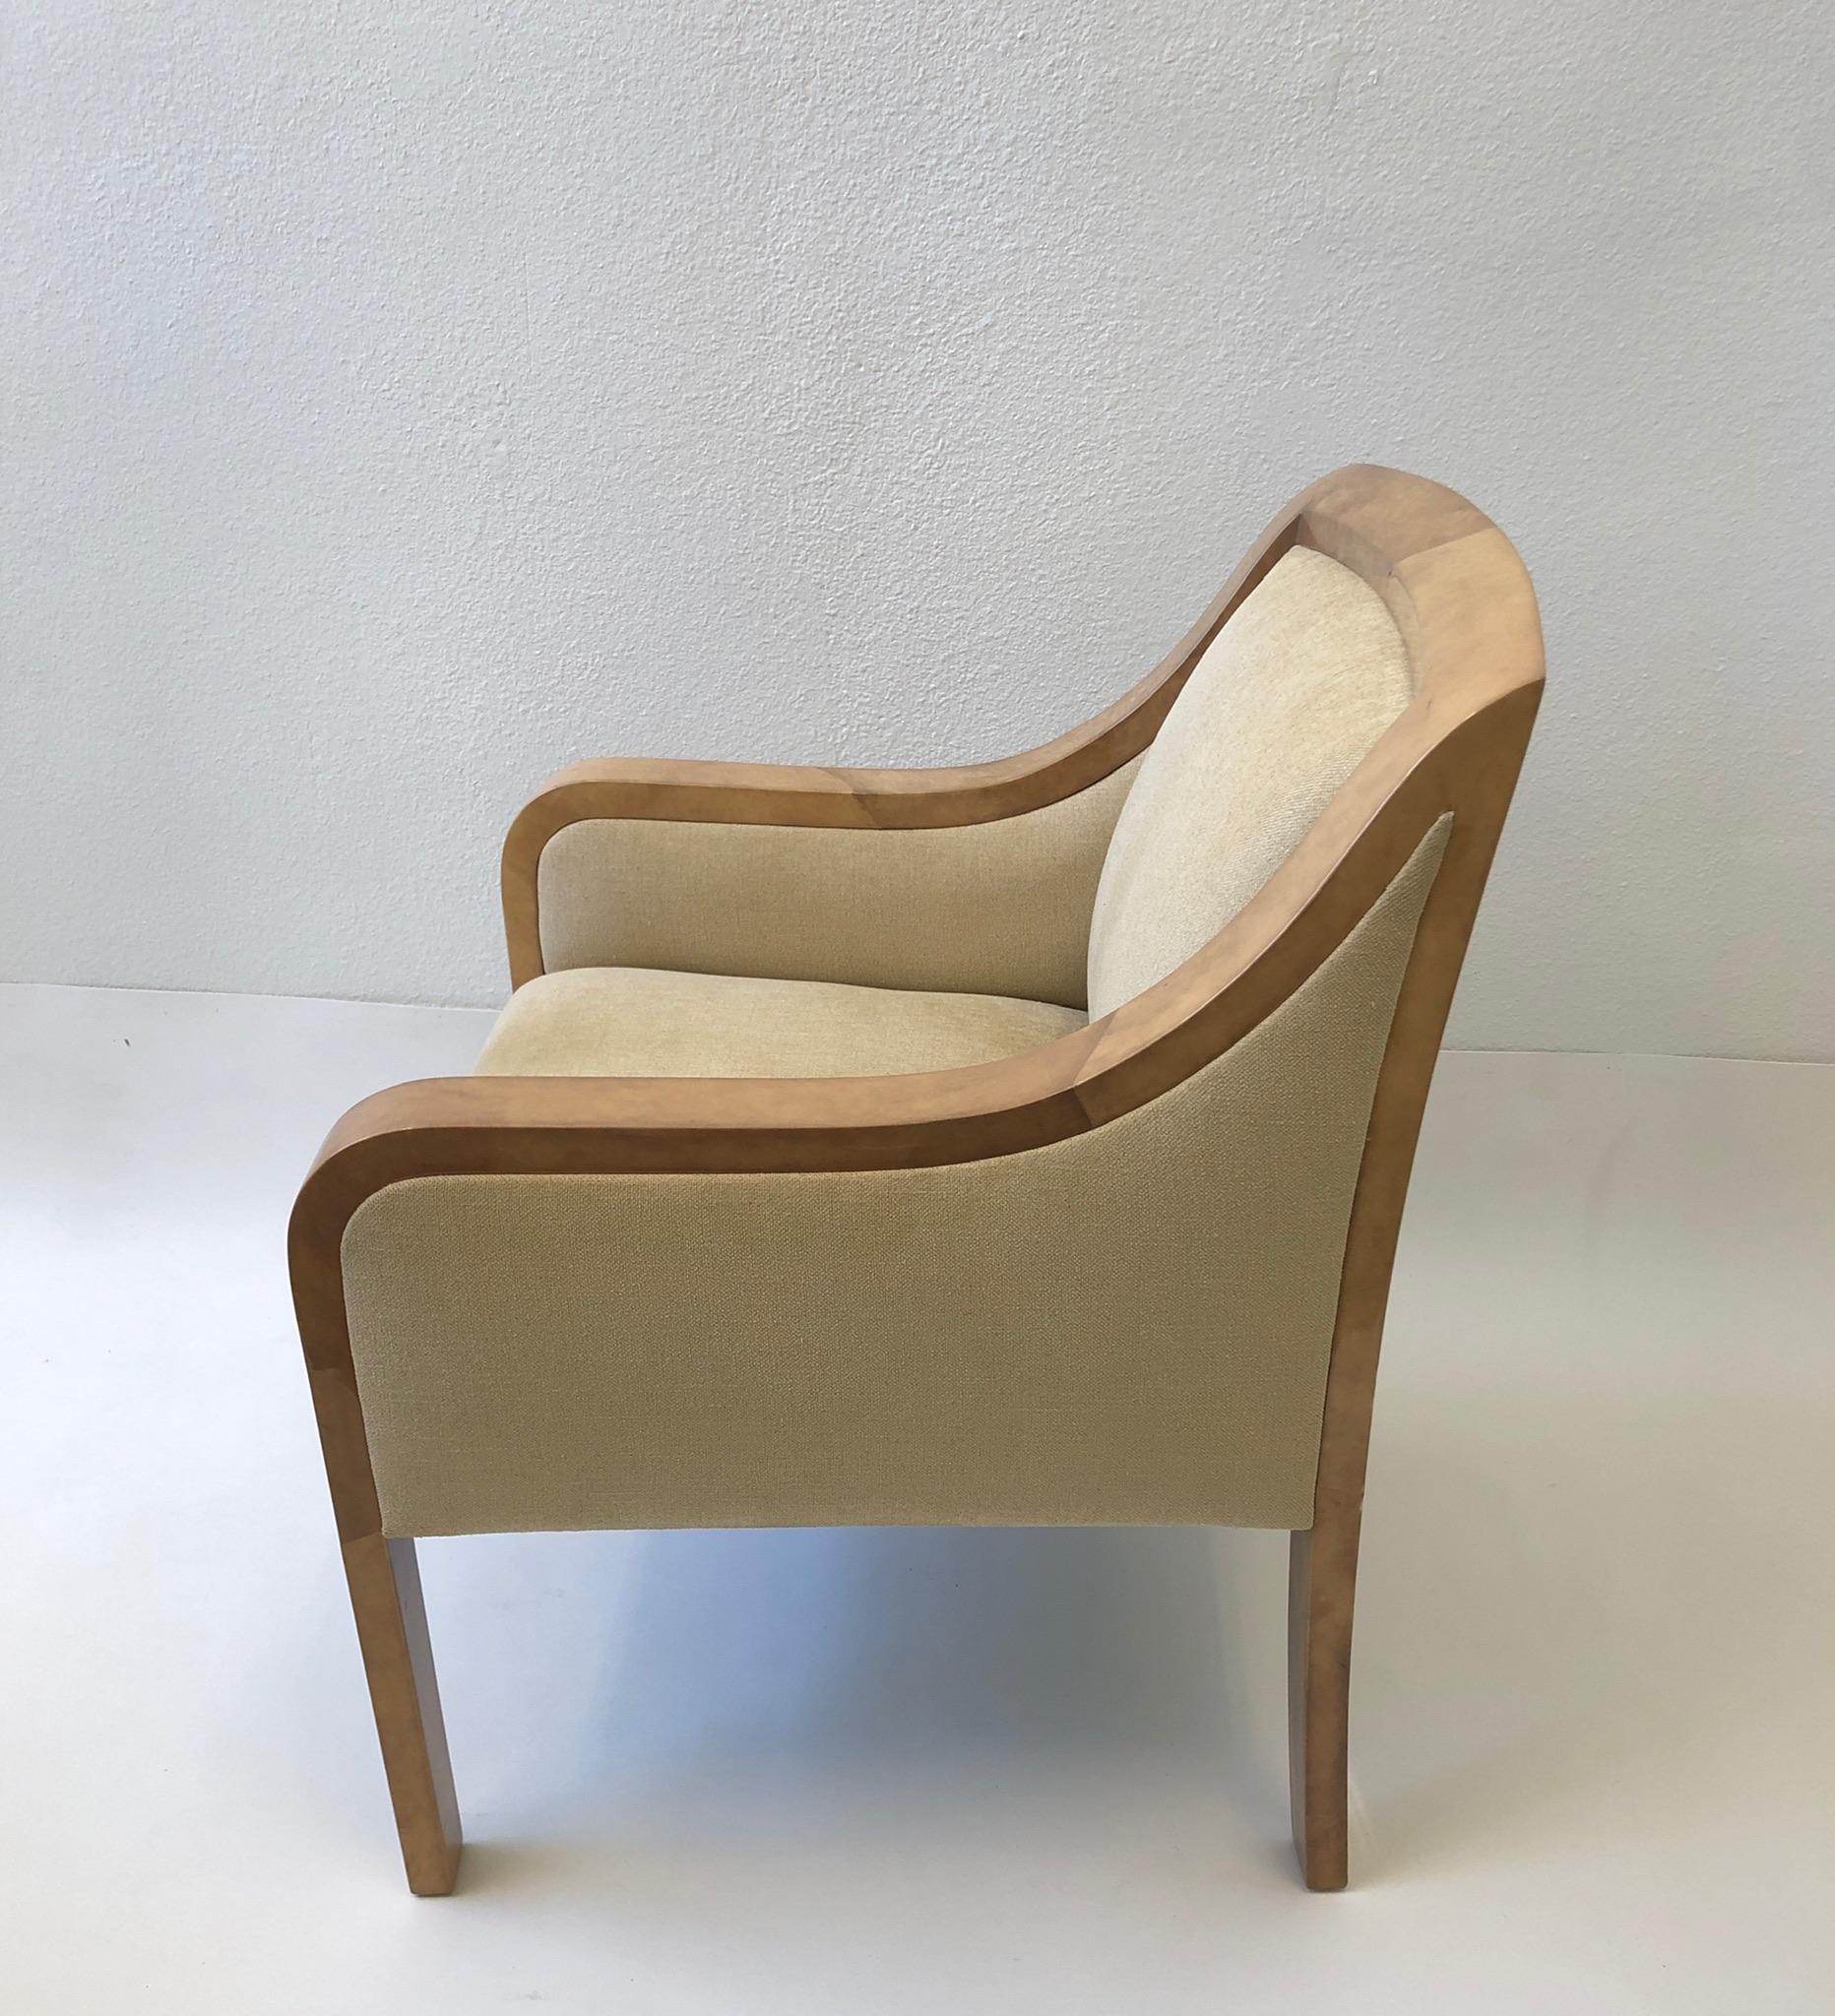 Spectacular 1980’s Regency lounge chair in the manner of Karl Springer. 
Out of an estate design by Steve Chase. In original condition, so it shows minor wear consistent with age. 
Measurements: 25” deep, 27” wide, 34.25” high and 19” seat.